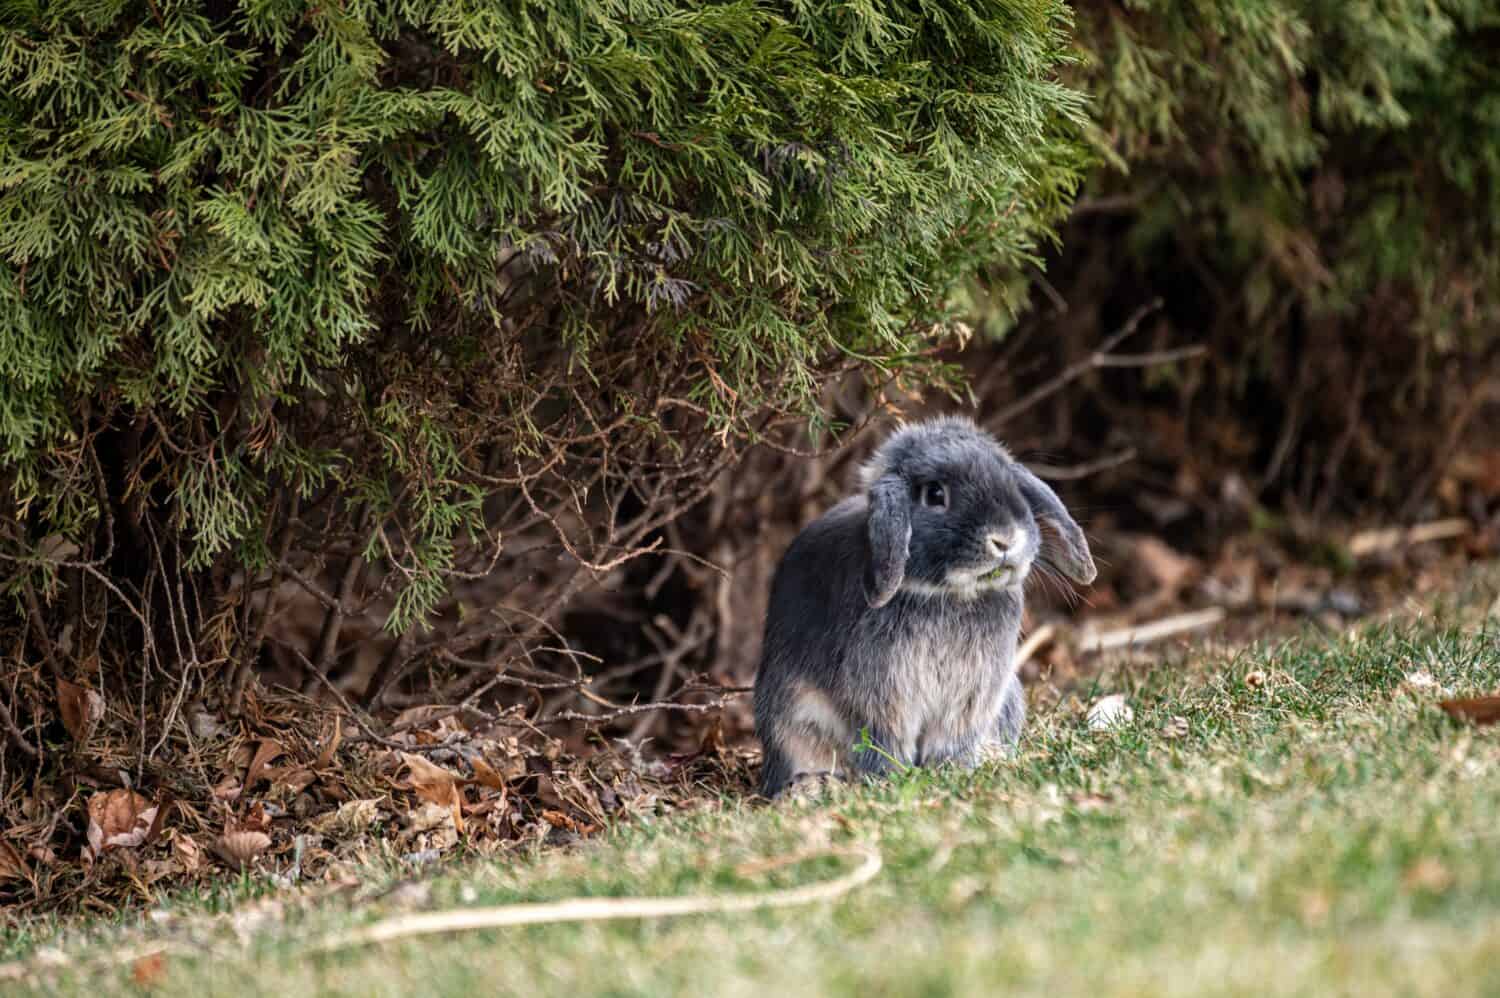 A young blue Holland lop rabbit is standing on a lawn.